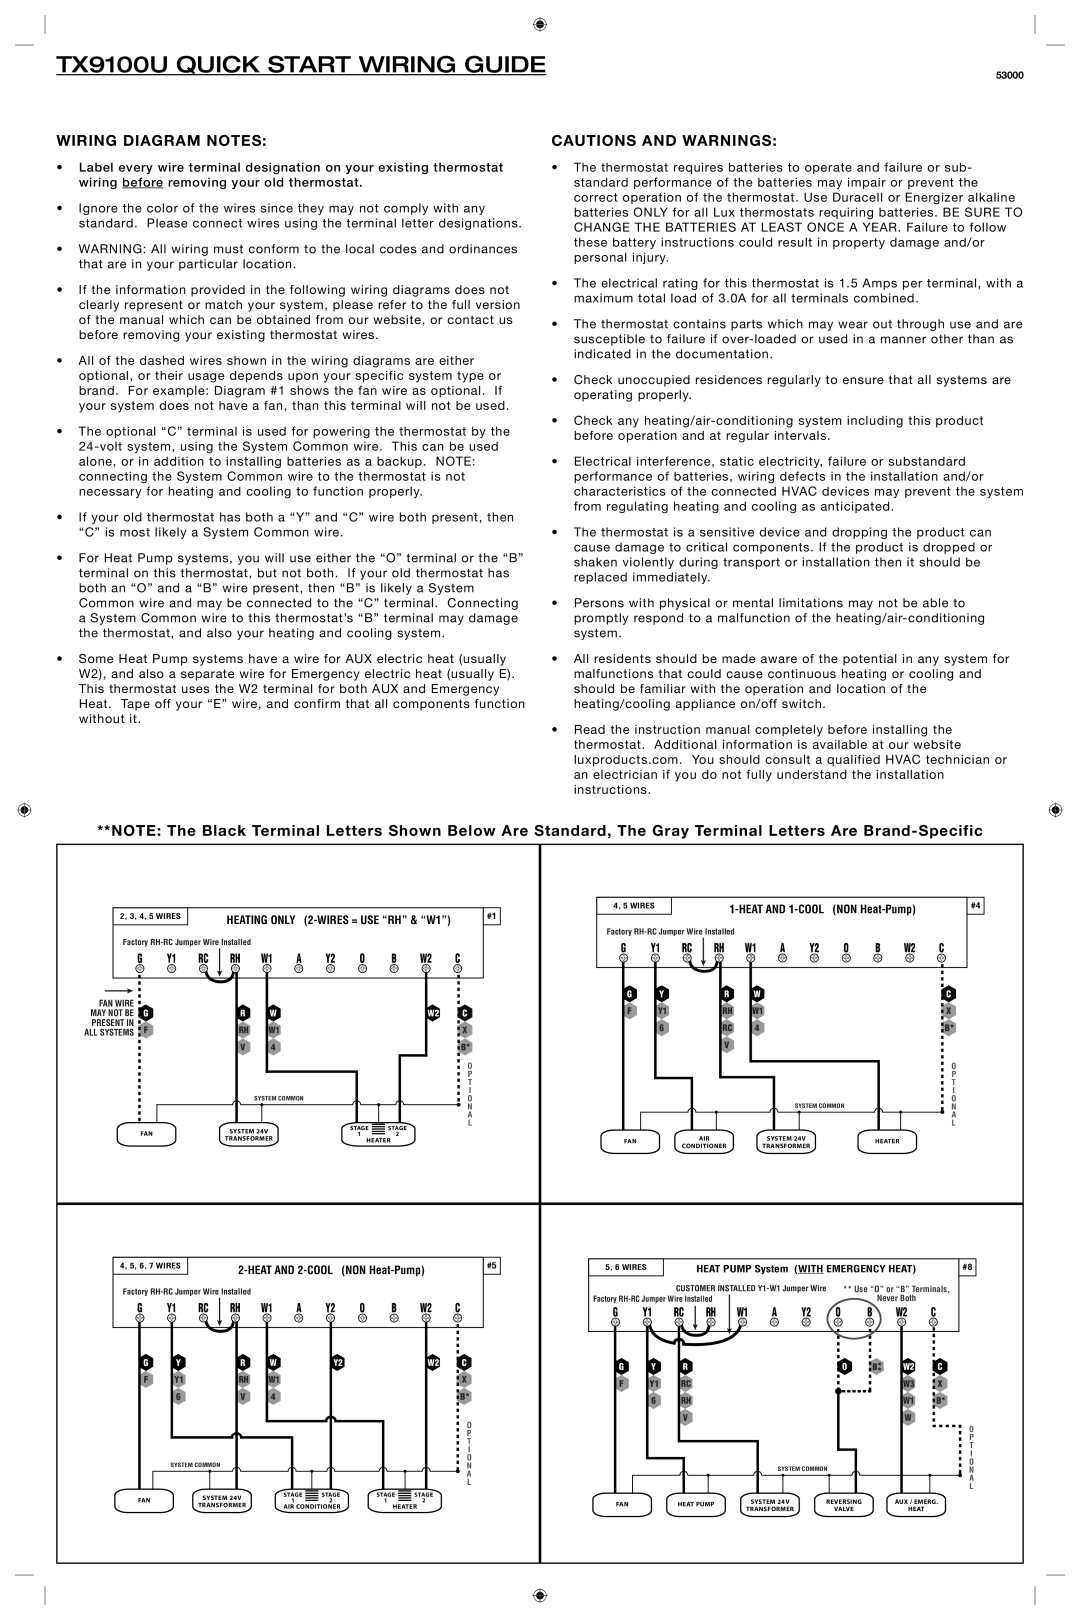 Lux Products instruction manual TX9100U QUICK START WIRING GUIDE, Wiring Diagram Notes, Cautions And Warnings 